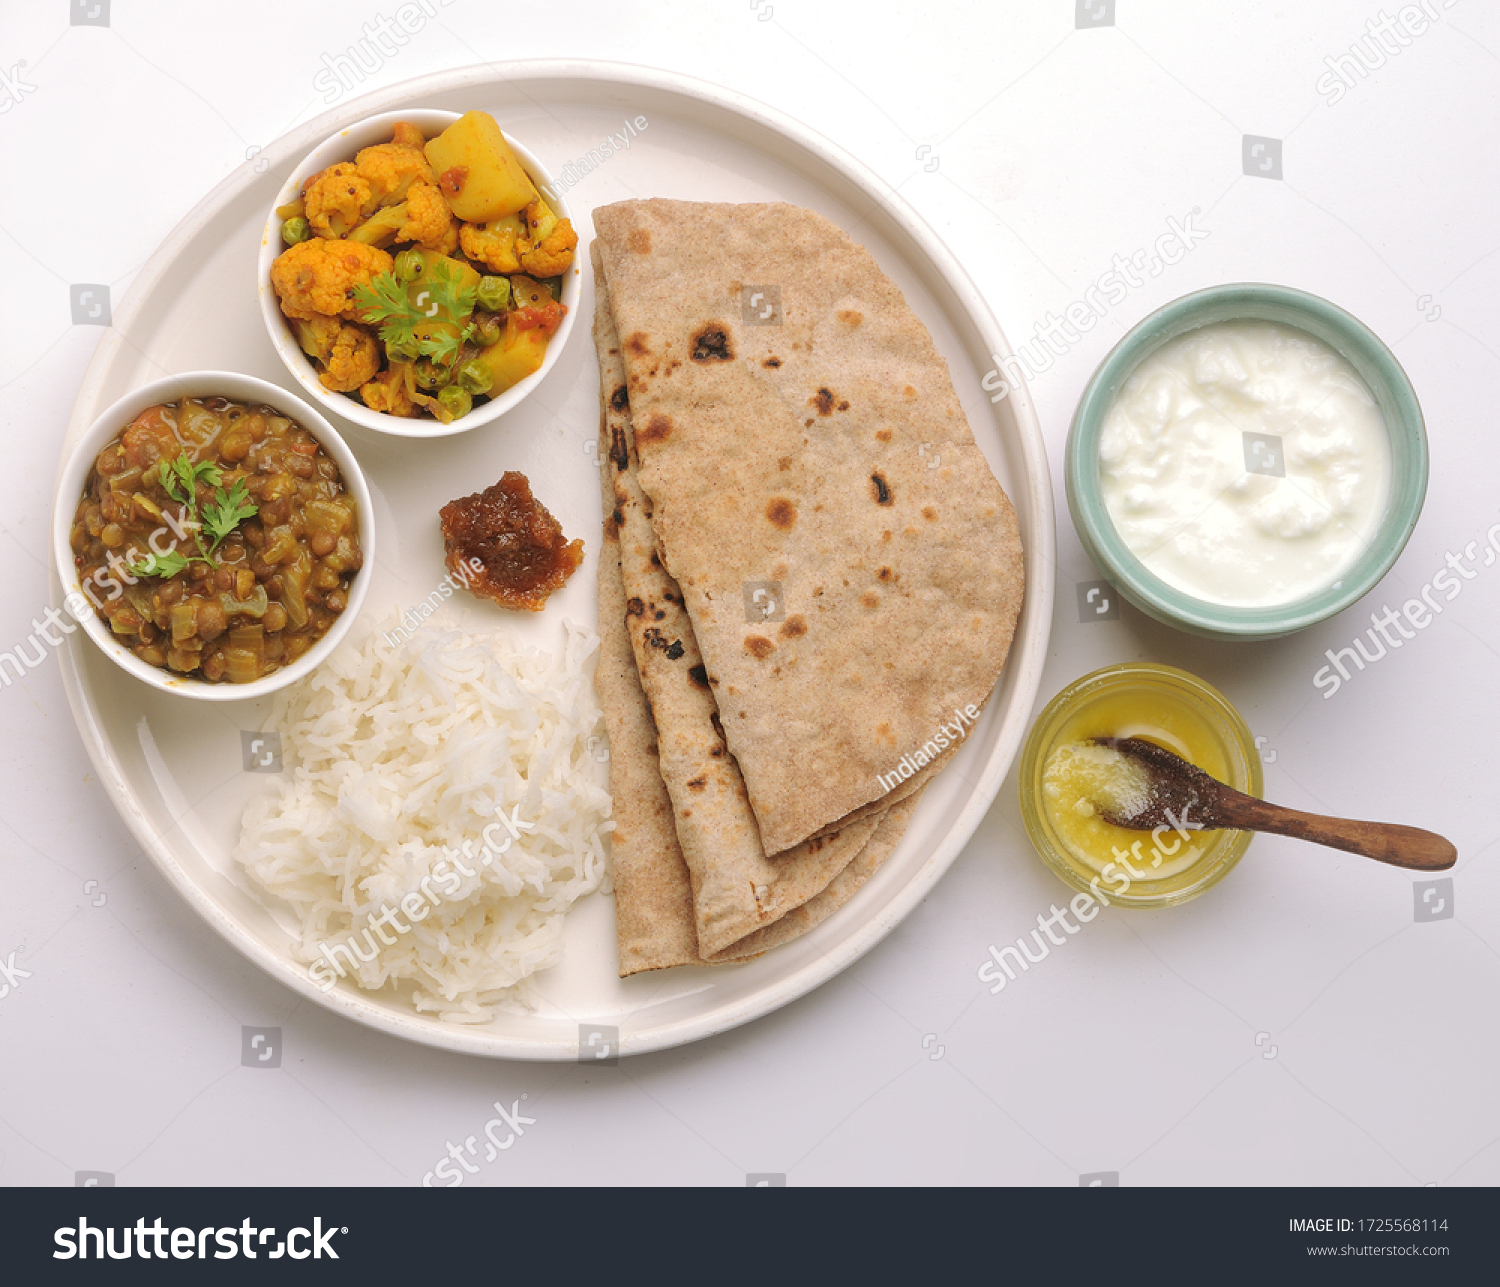 vegetarian Indian thali or Indian home food with lentil dal, cauliflower curry, roti or Indian flat bread, ghee butter, lemon pickle, rice, curd or yogurt #1725568114